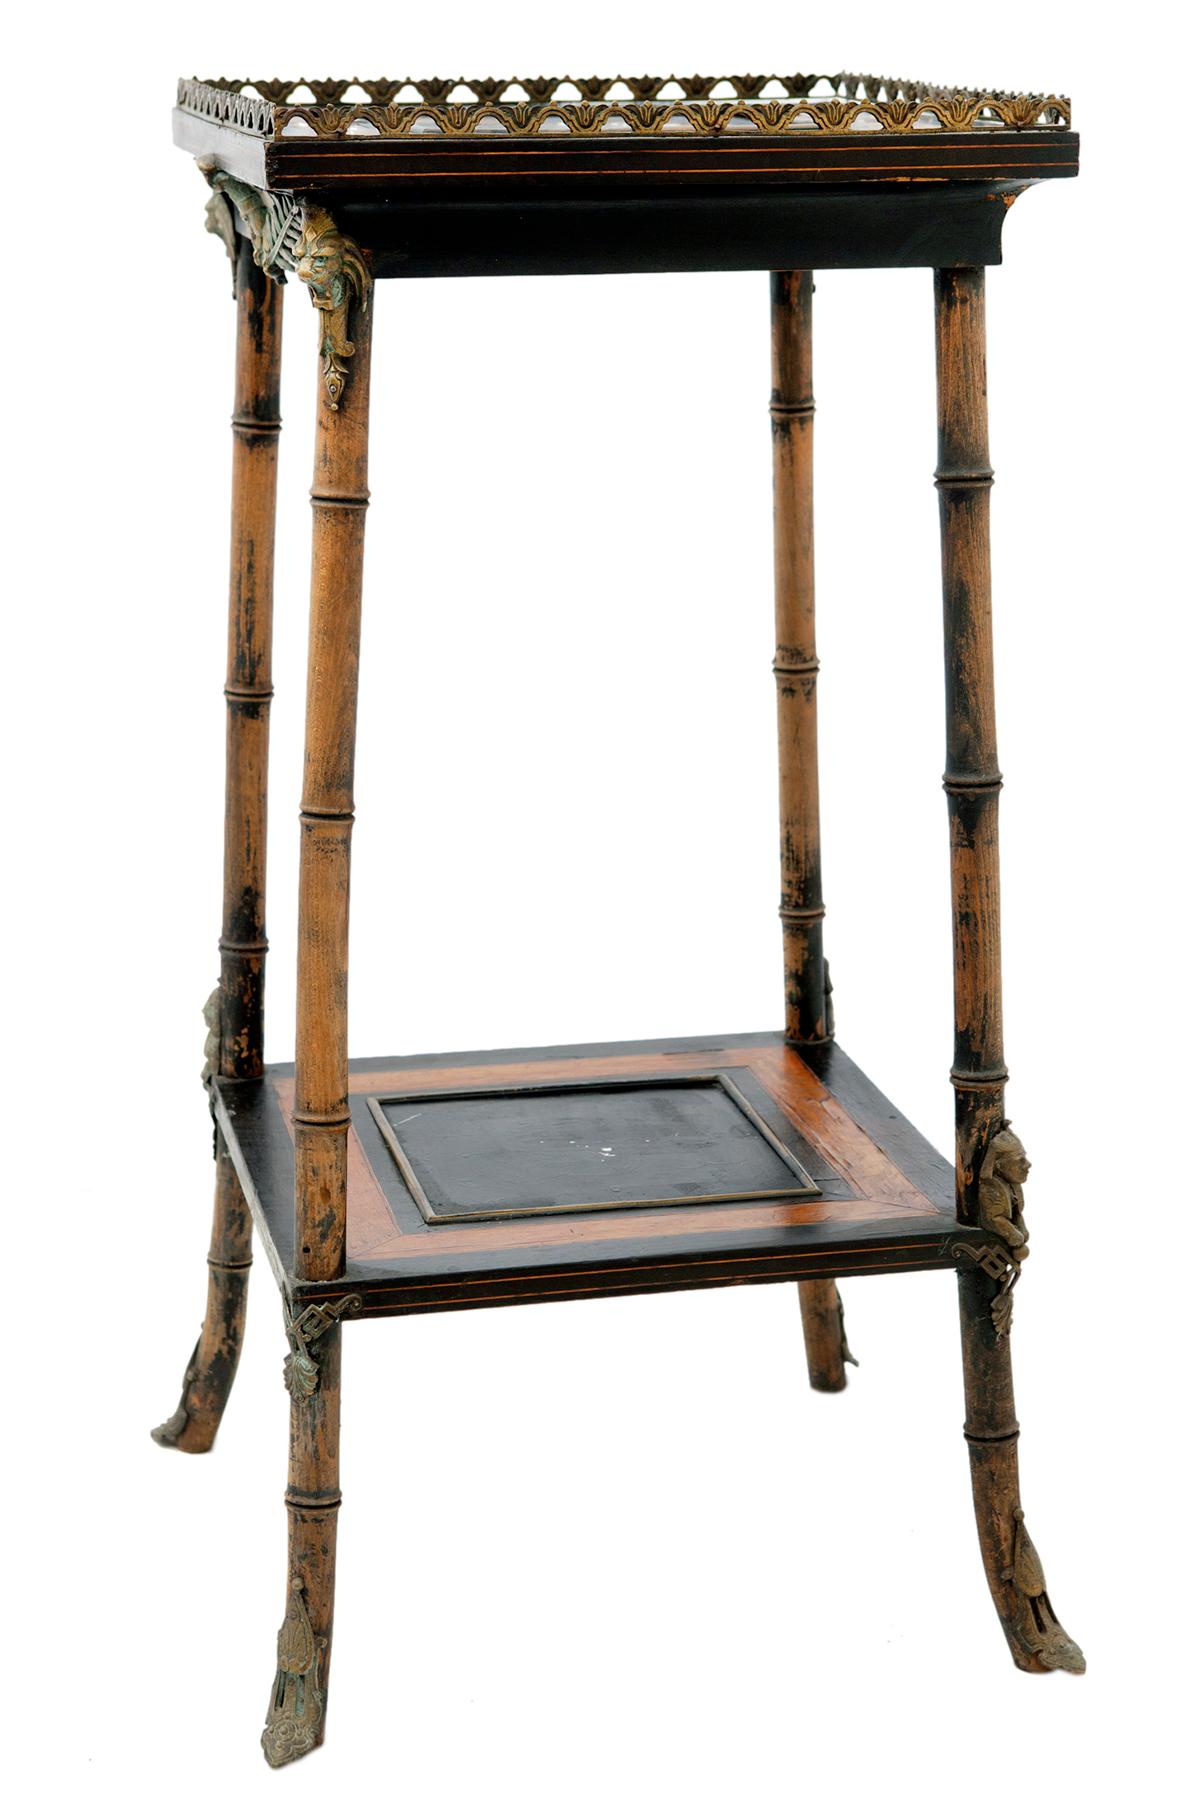 Marquetry Egyptian Revival Plant Stand with Inlaid Tile Top & Bronze Cage Trim. For Sale